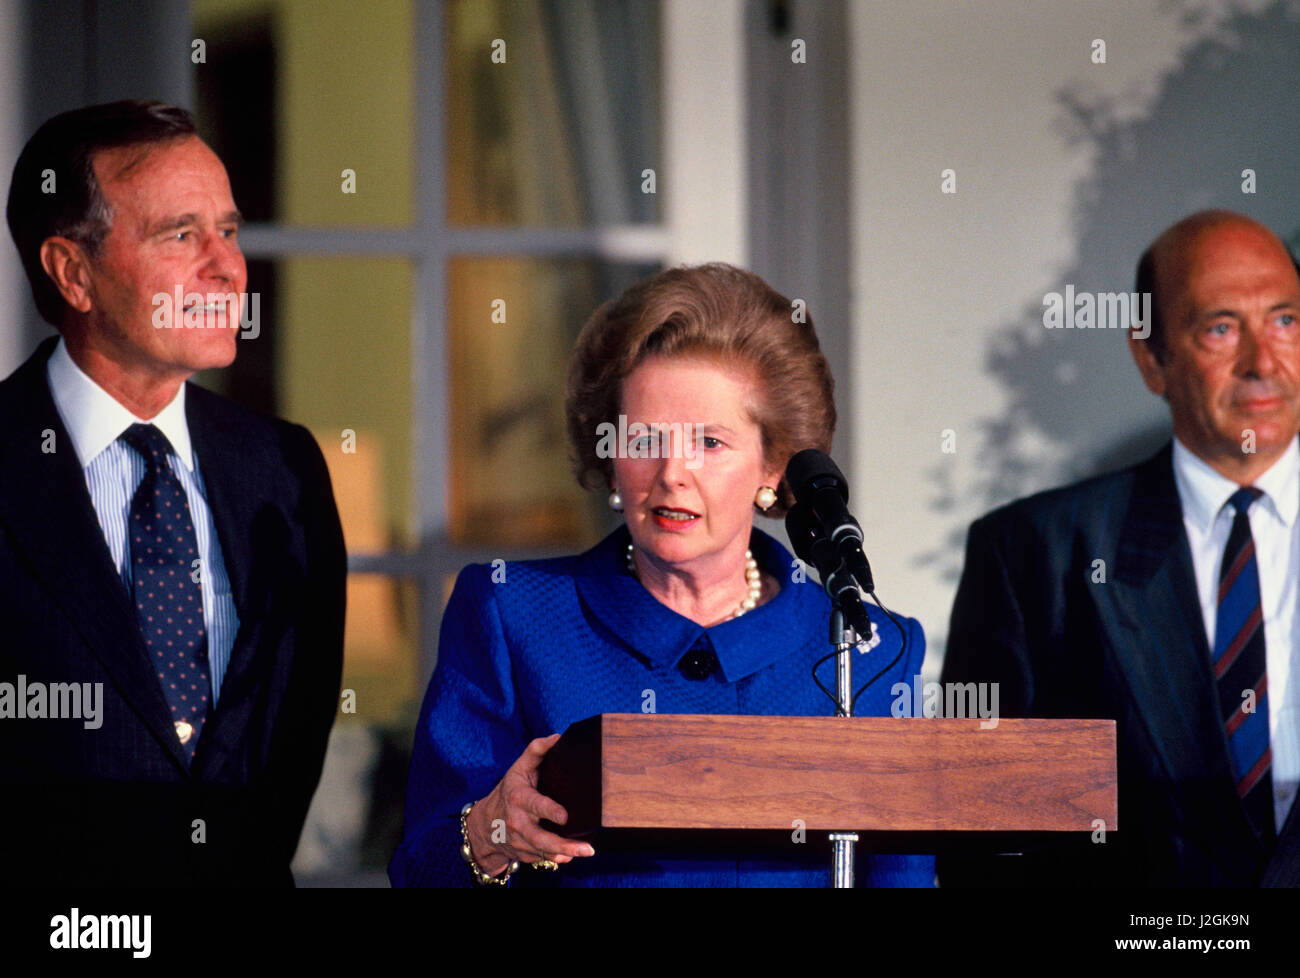 President Herbert Walk Bush, Margaret Thatcher and Manfred Worner, Secretary General of NATO, make a statement about the invasion of Kuwait in the Rose Garden of the White House in October 1990 Stock Photo